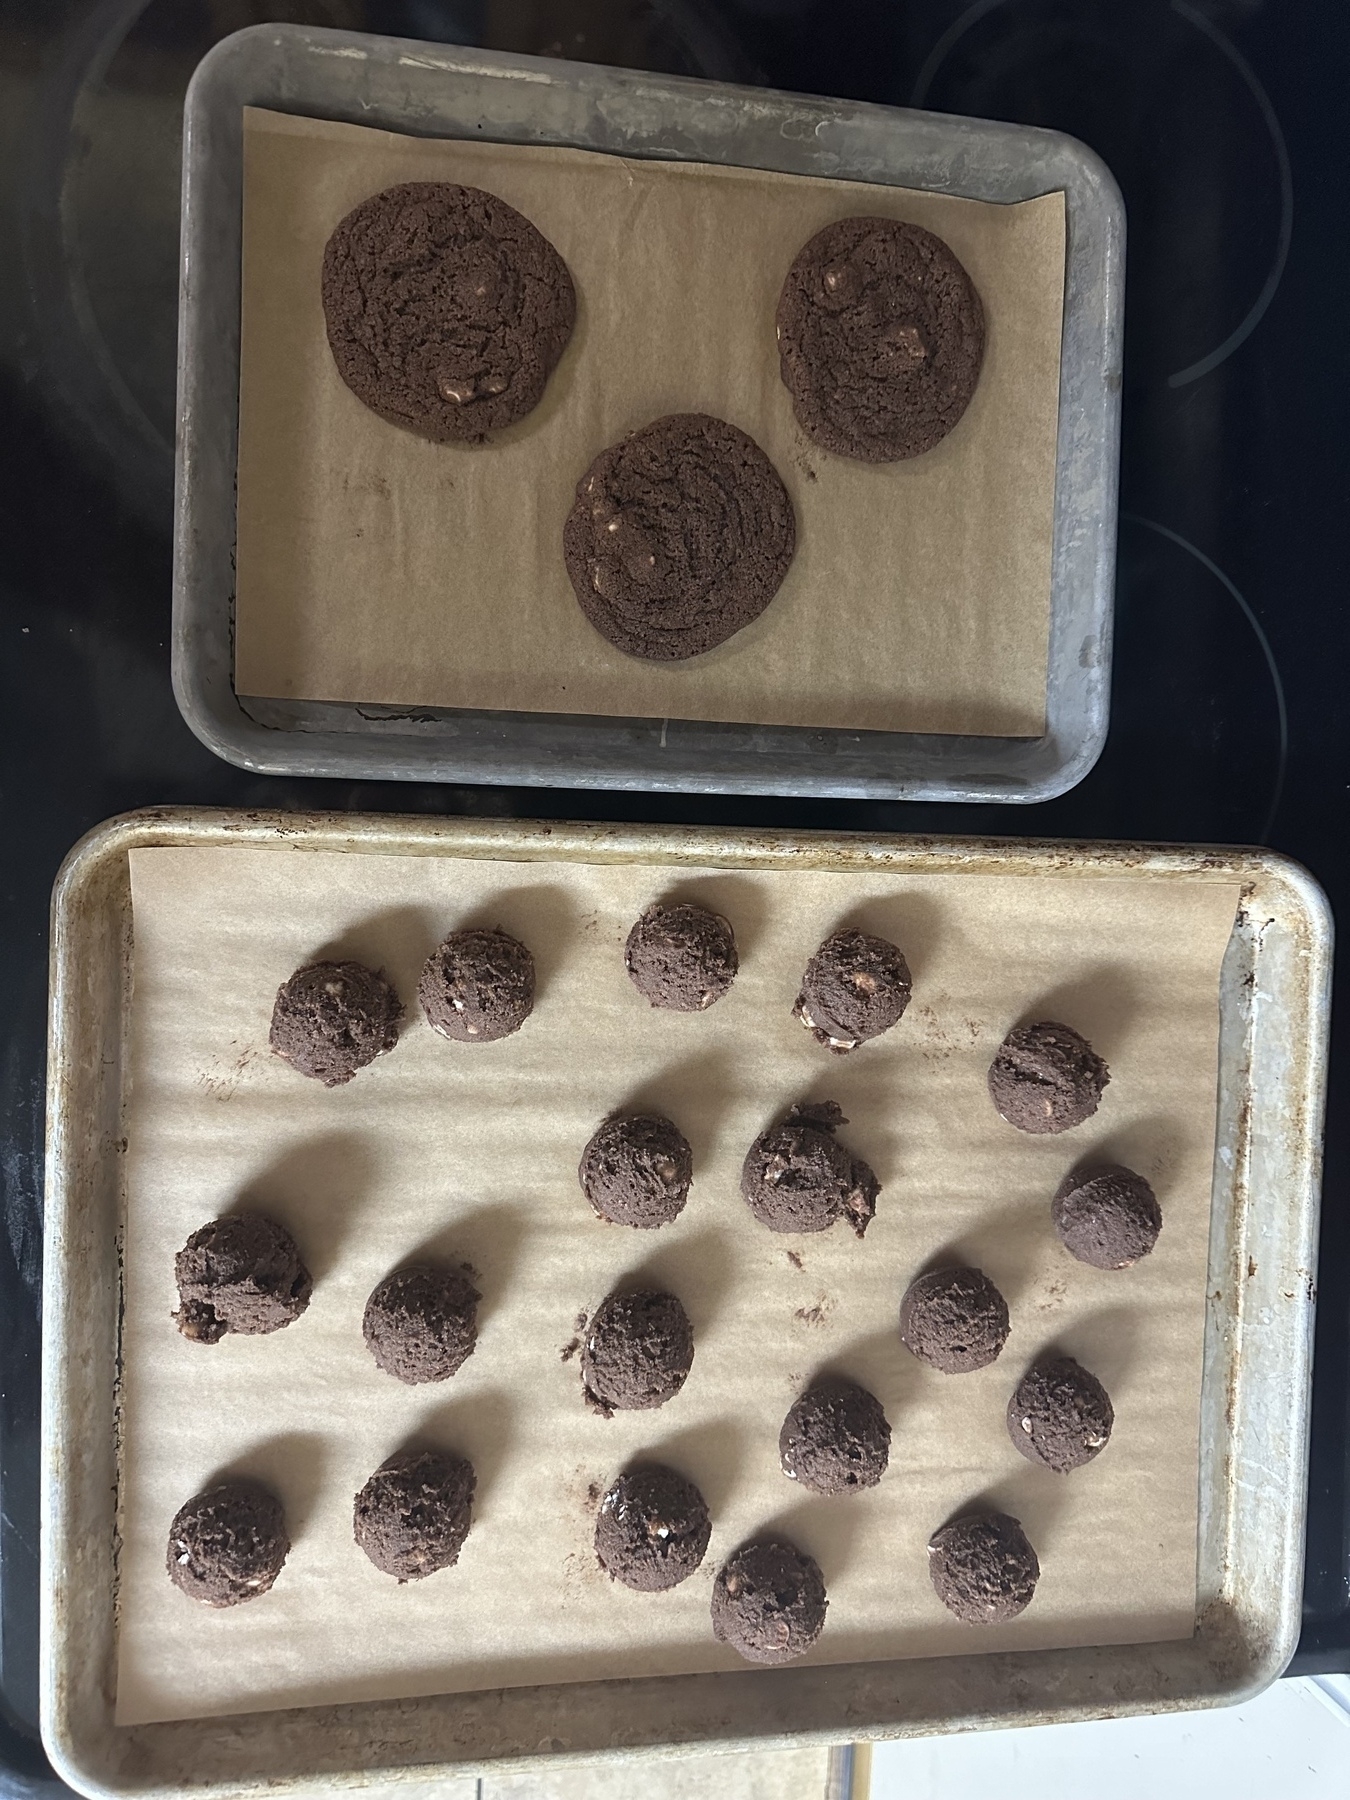 One small tray of baked chocolate cookies next to a larger tray of uncooked dough balls. 